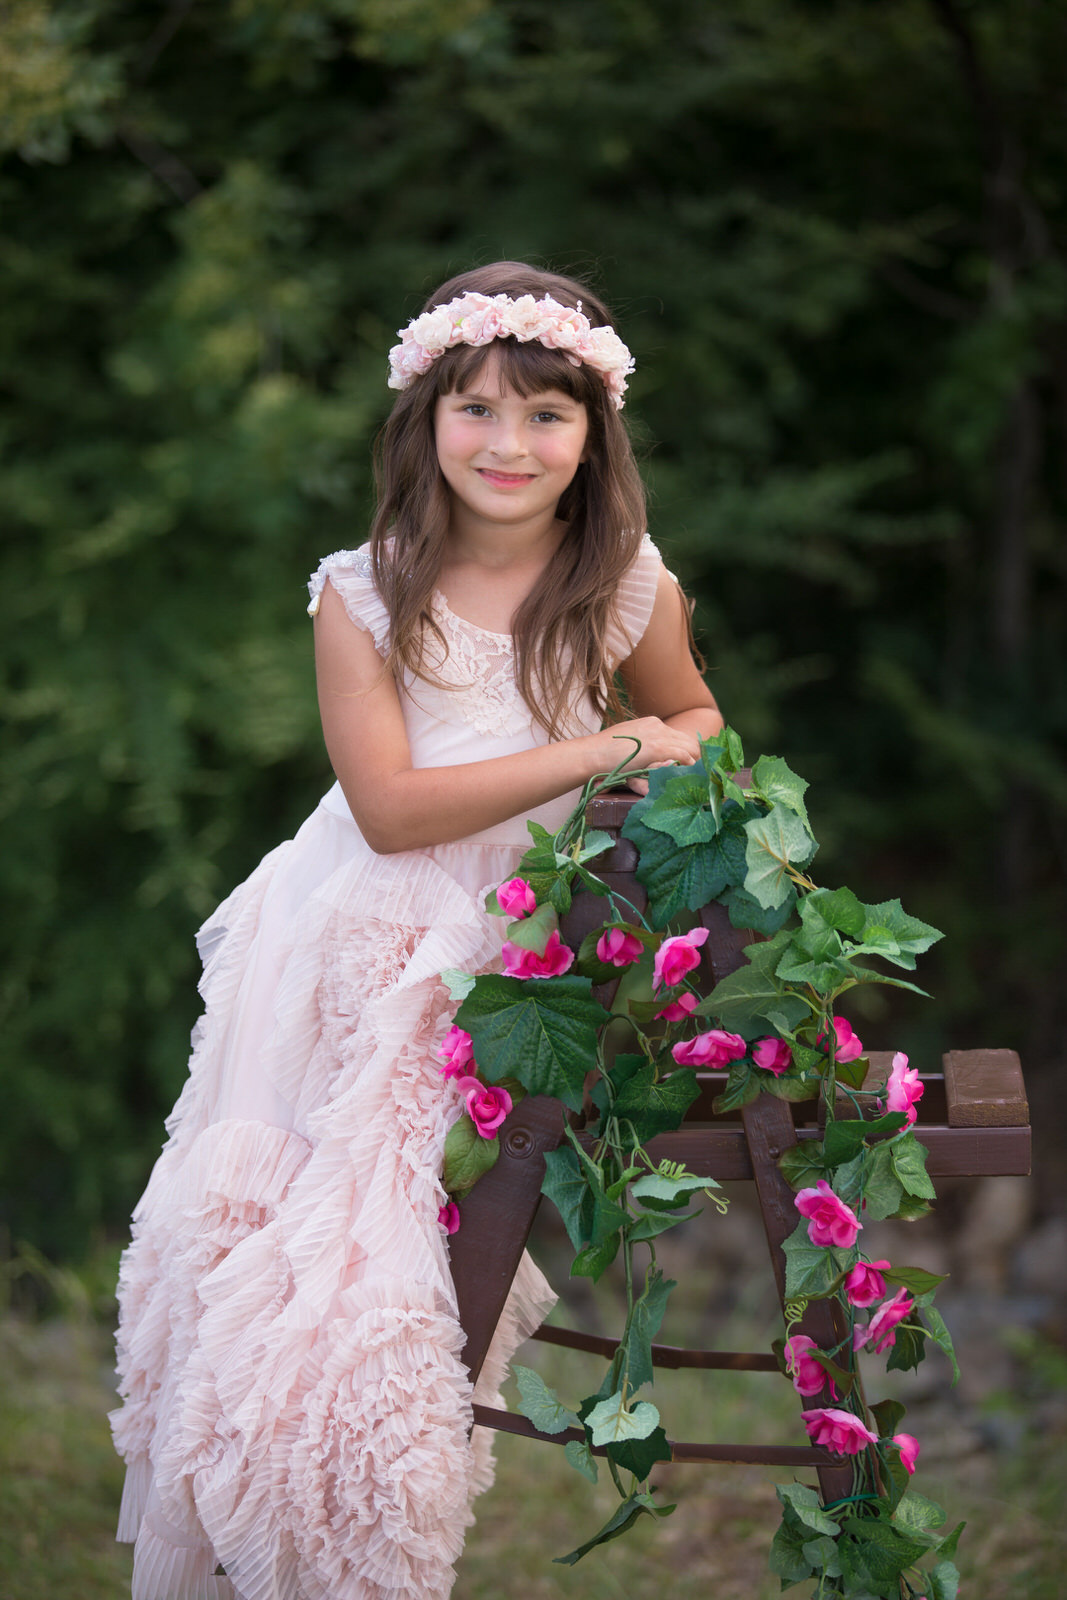 A young girl in a long pink dress leans on a small wooden ladder covered in pink roses